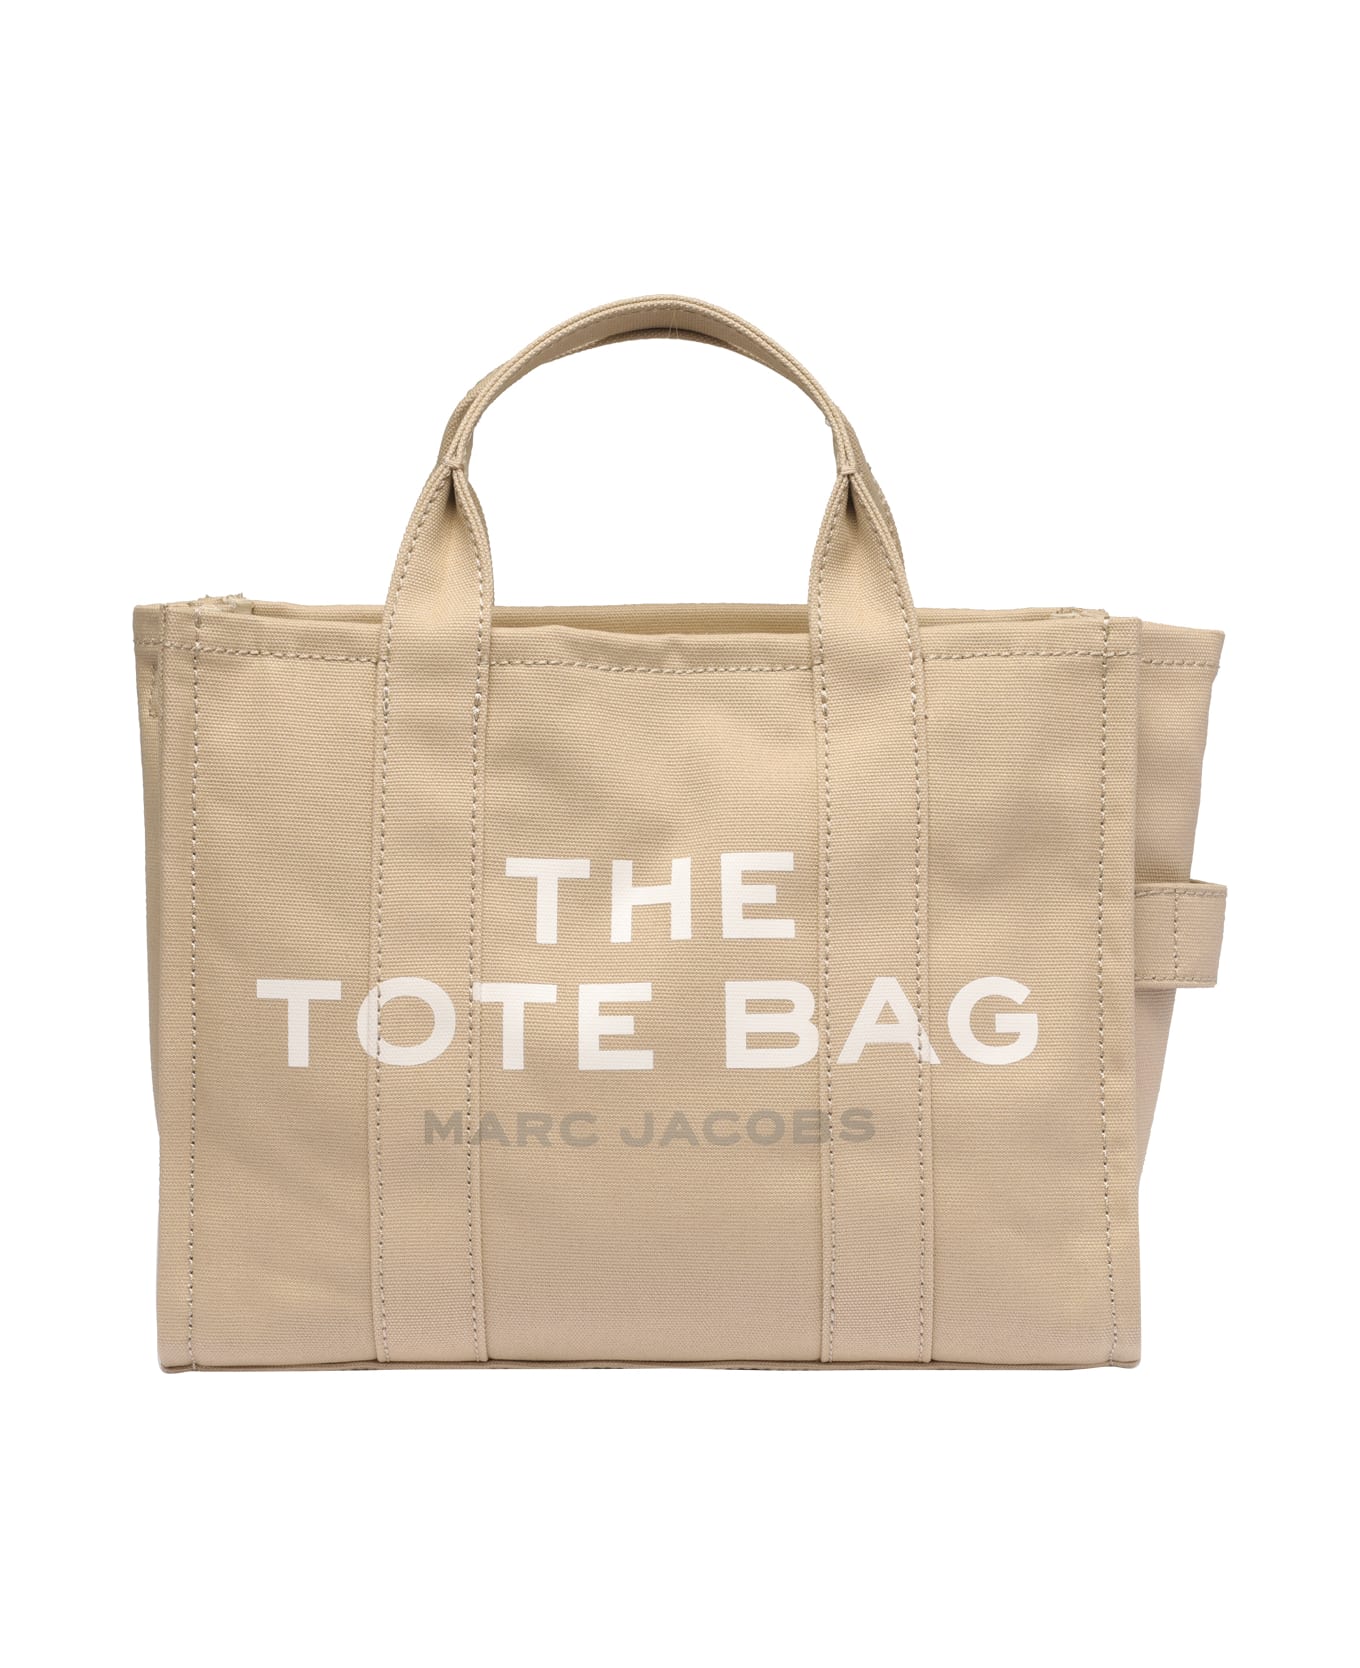 Marc Jacobs The Medium Tote Bag - Beige トートバッグ